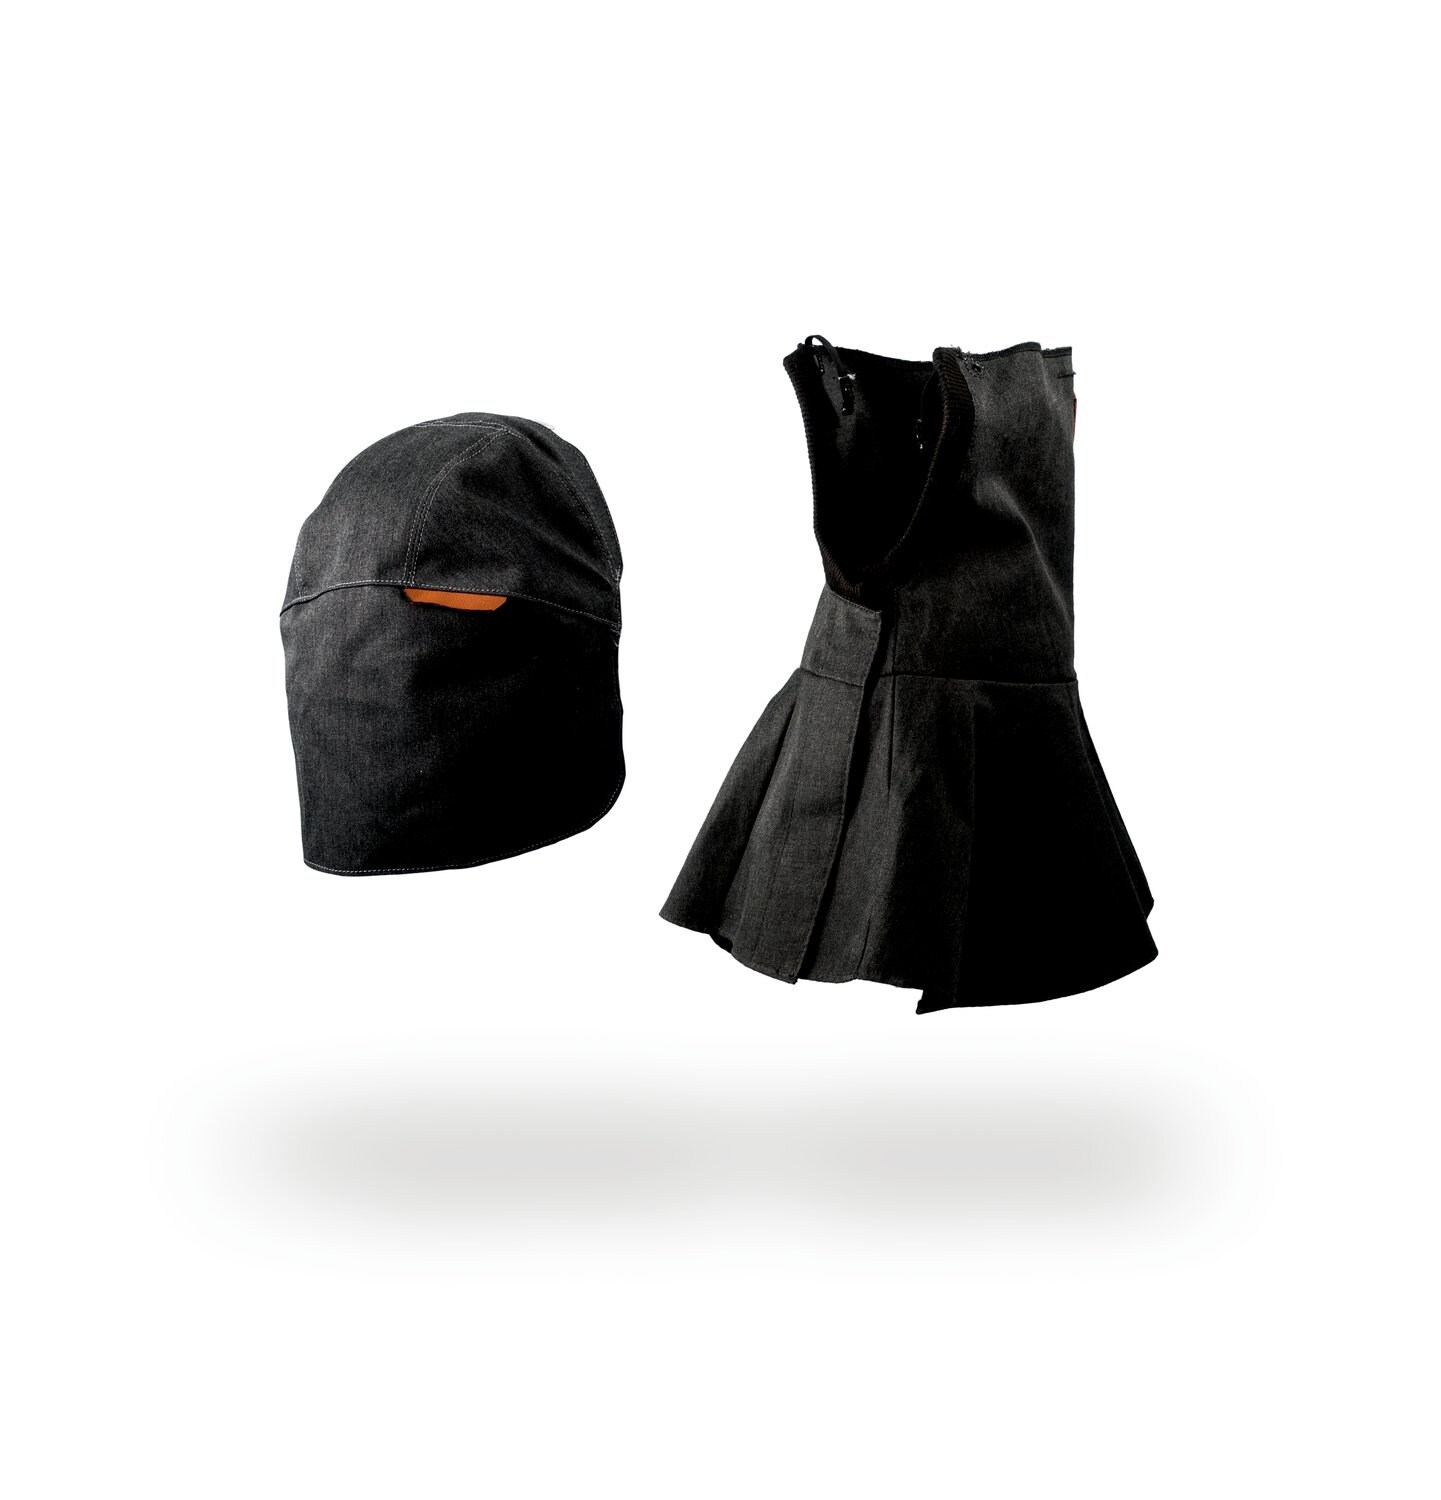 7100216088 - 3M Speedglas G5-01 1000 APF Kit with Flame Retardant Neck Shroud and
Large Head Cover, 46-1000-00, 1 EA/Case